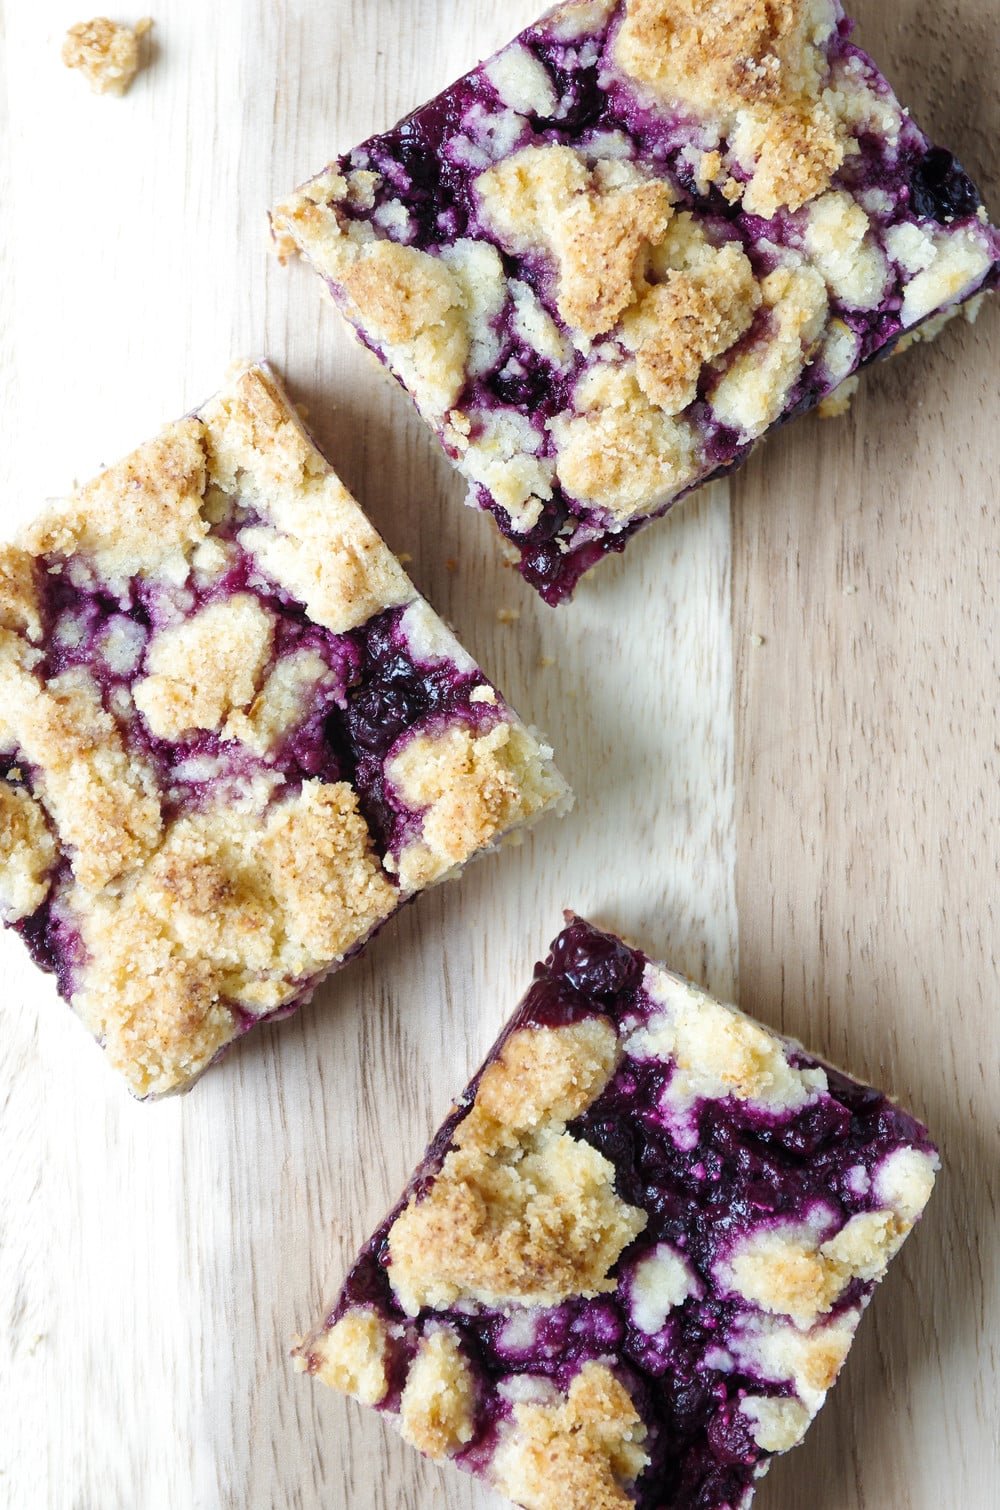 Blueberry Crumble Bars Recipe - The Forked Spoon